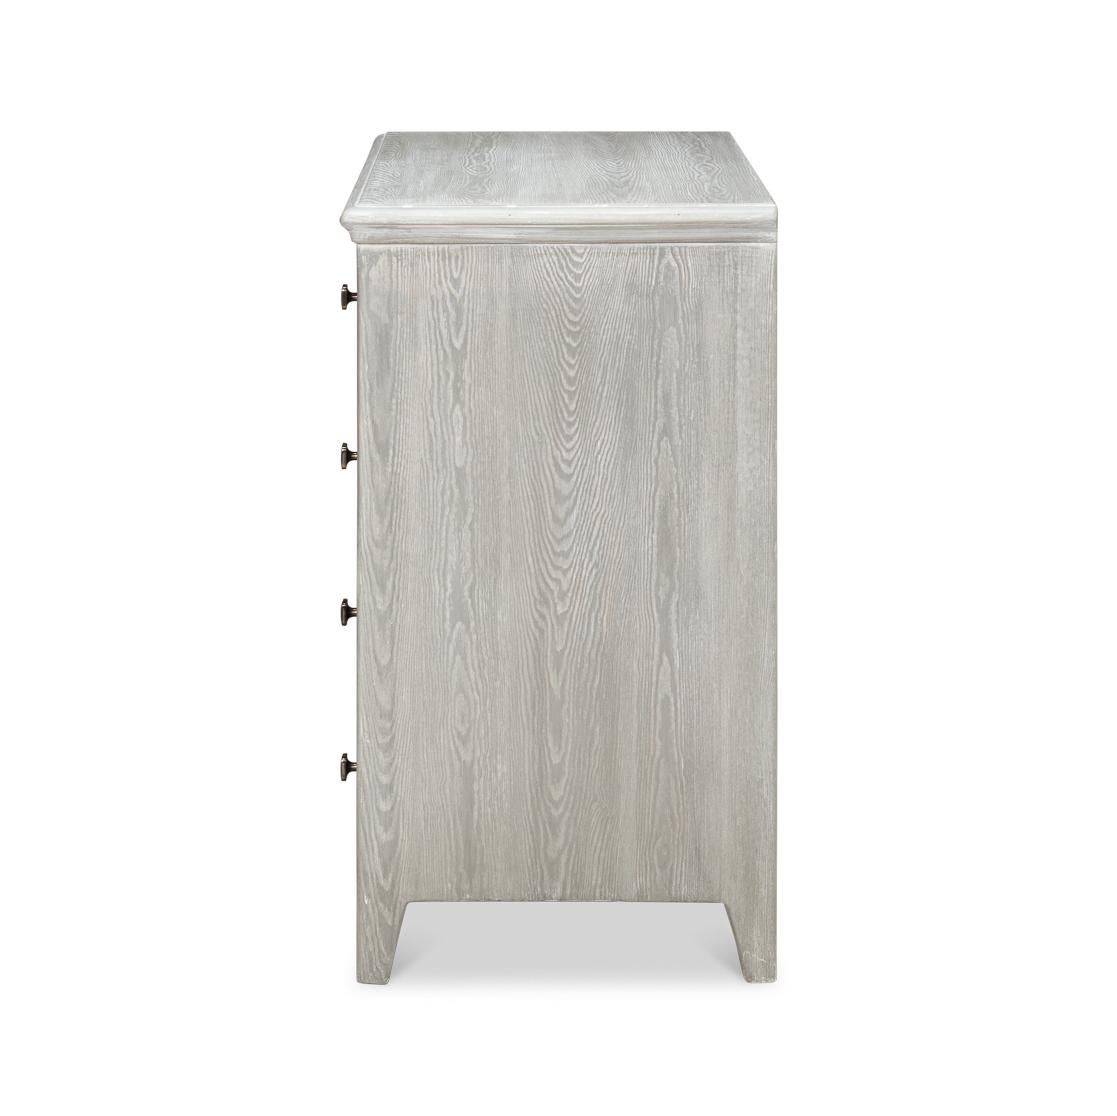 Wood Classic Four Drawer Chest - Gray Wash For Sale